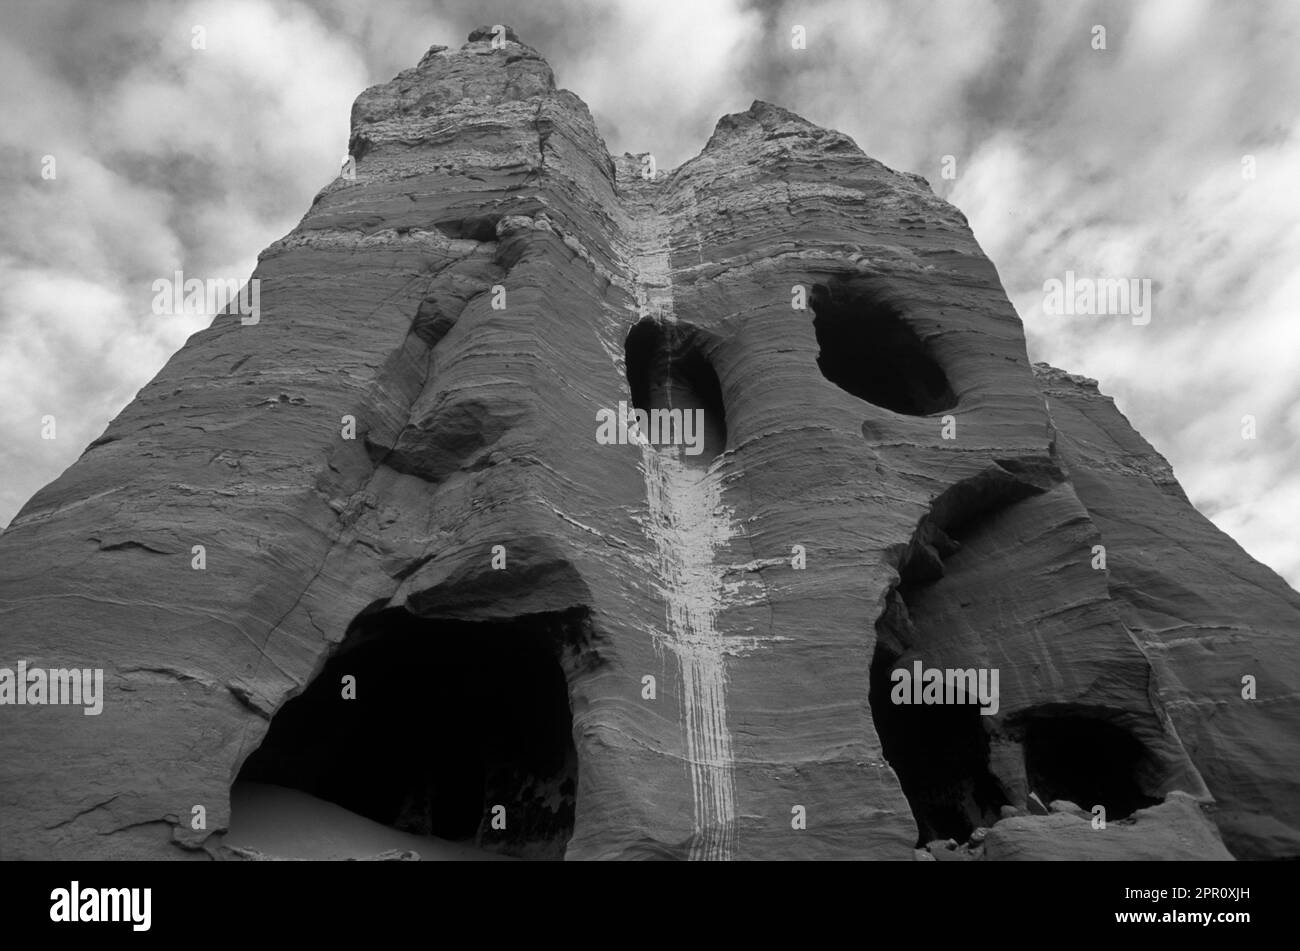 Multilevel CAVE DWELLINGS near THOLING date back to the 10th C. in the GUGE KINGDOM west of KAILASH - TIBET Stock Photo